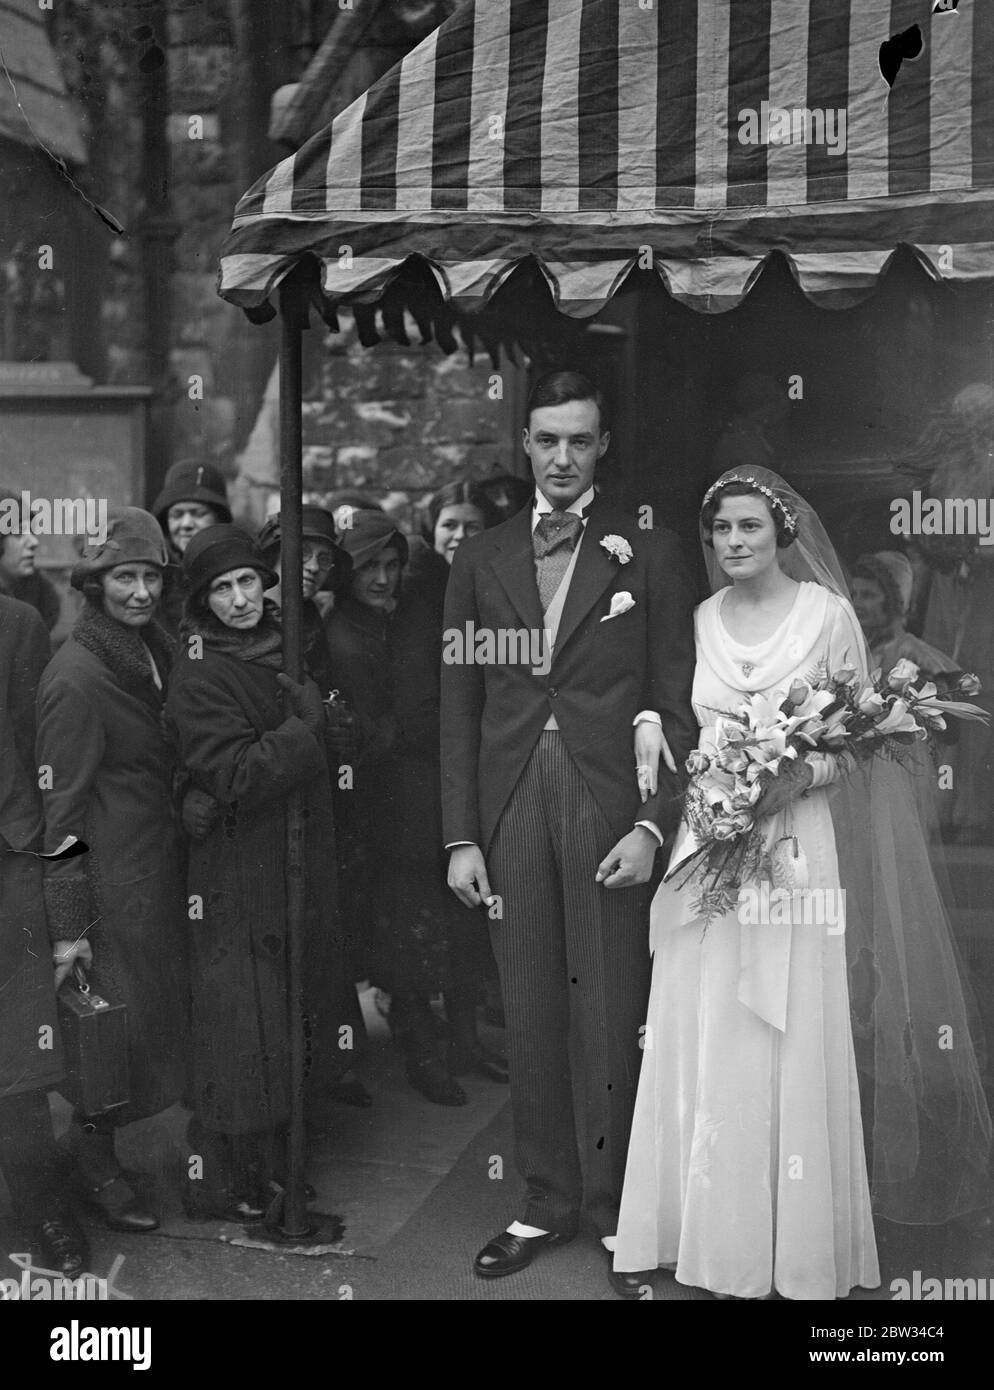 Old fashioned posing for society wedding . The bridesmaids all carried old fashioned posies and the smallest bridesmaids wore a bonnet and cape at the wedding of Miss Prudence Maxwell Lyte to Mr John Newman McClean which took place at St Peter ' s church , Cranley Gardens , London . The bride and groom leaving the church after the ceremony . 19 April 1932 . Stock Photo